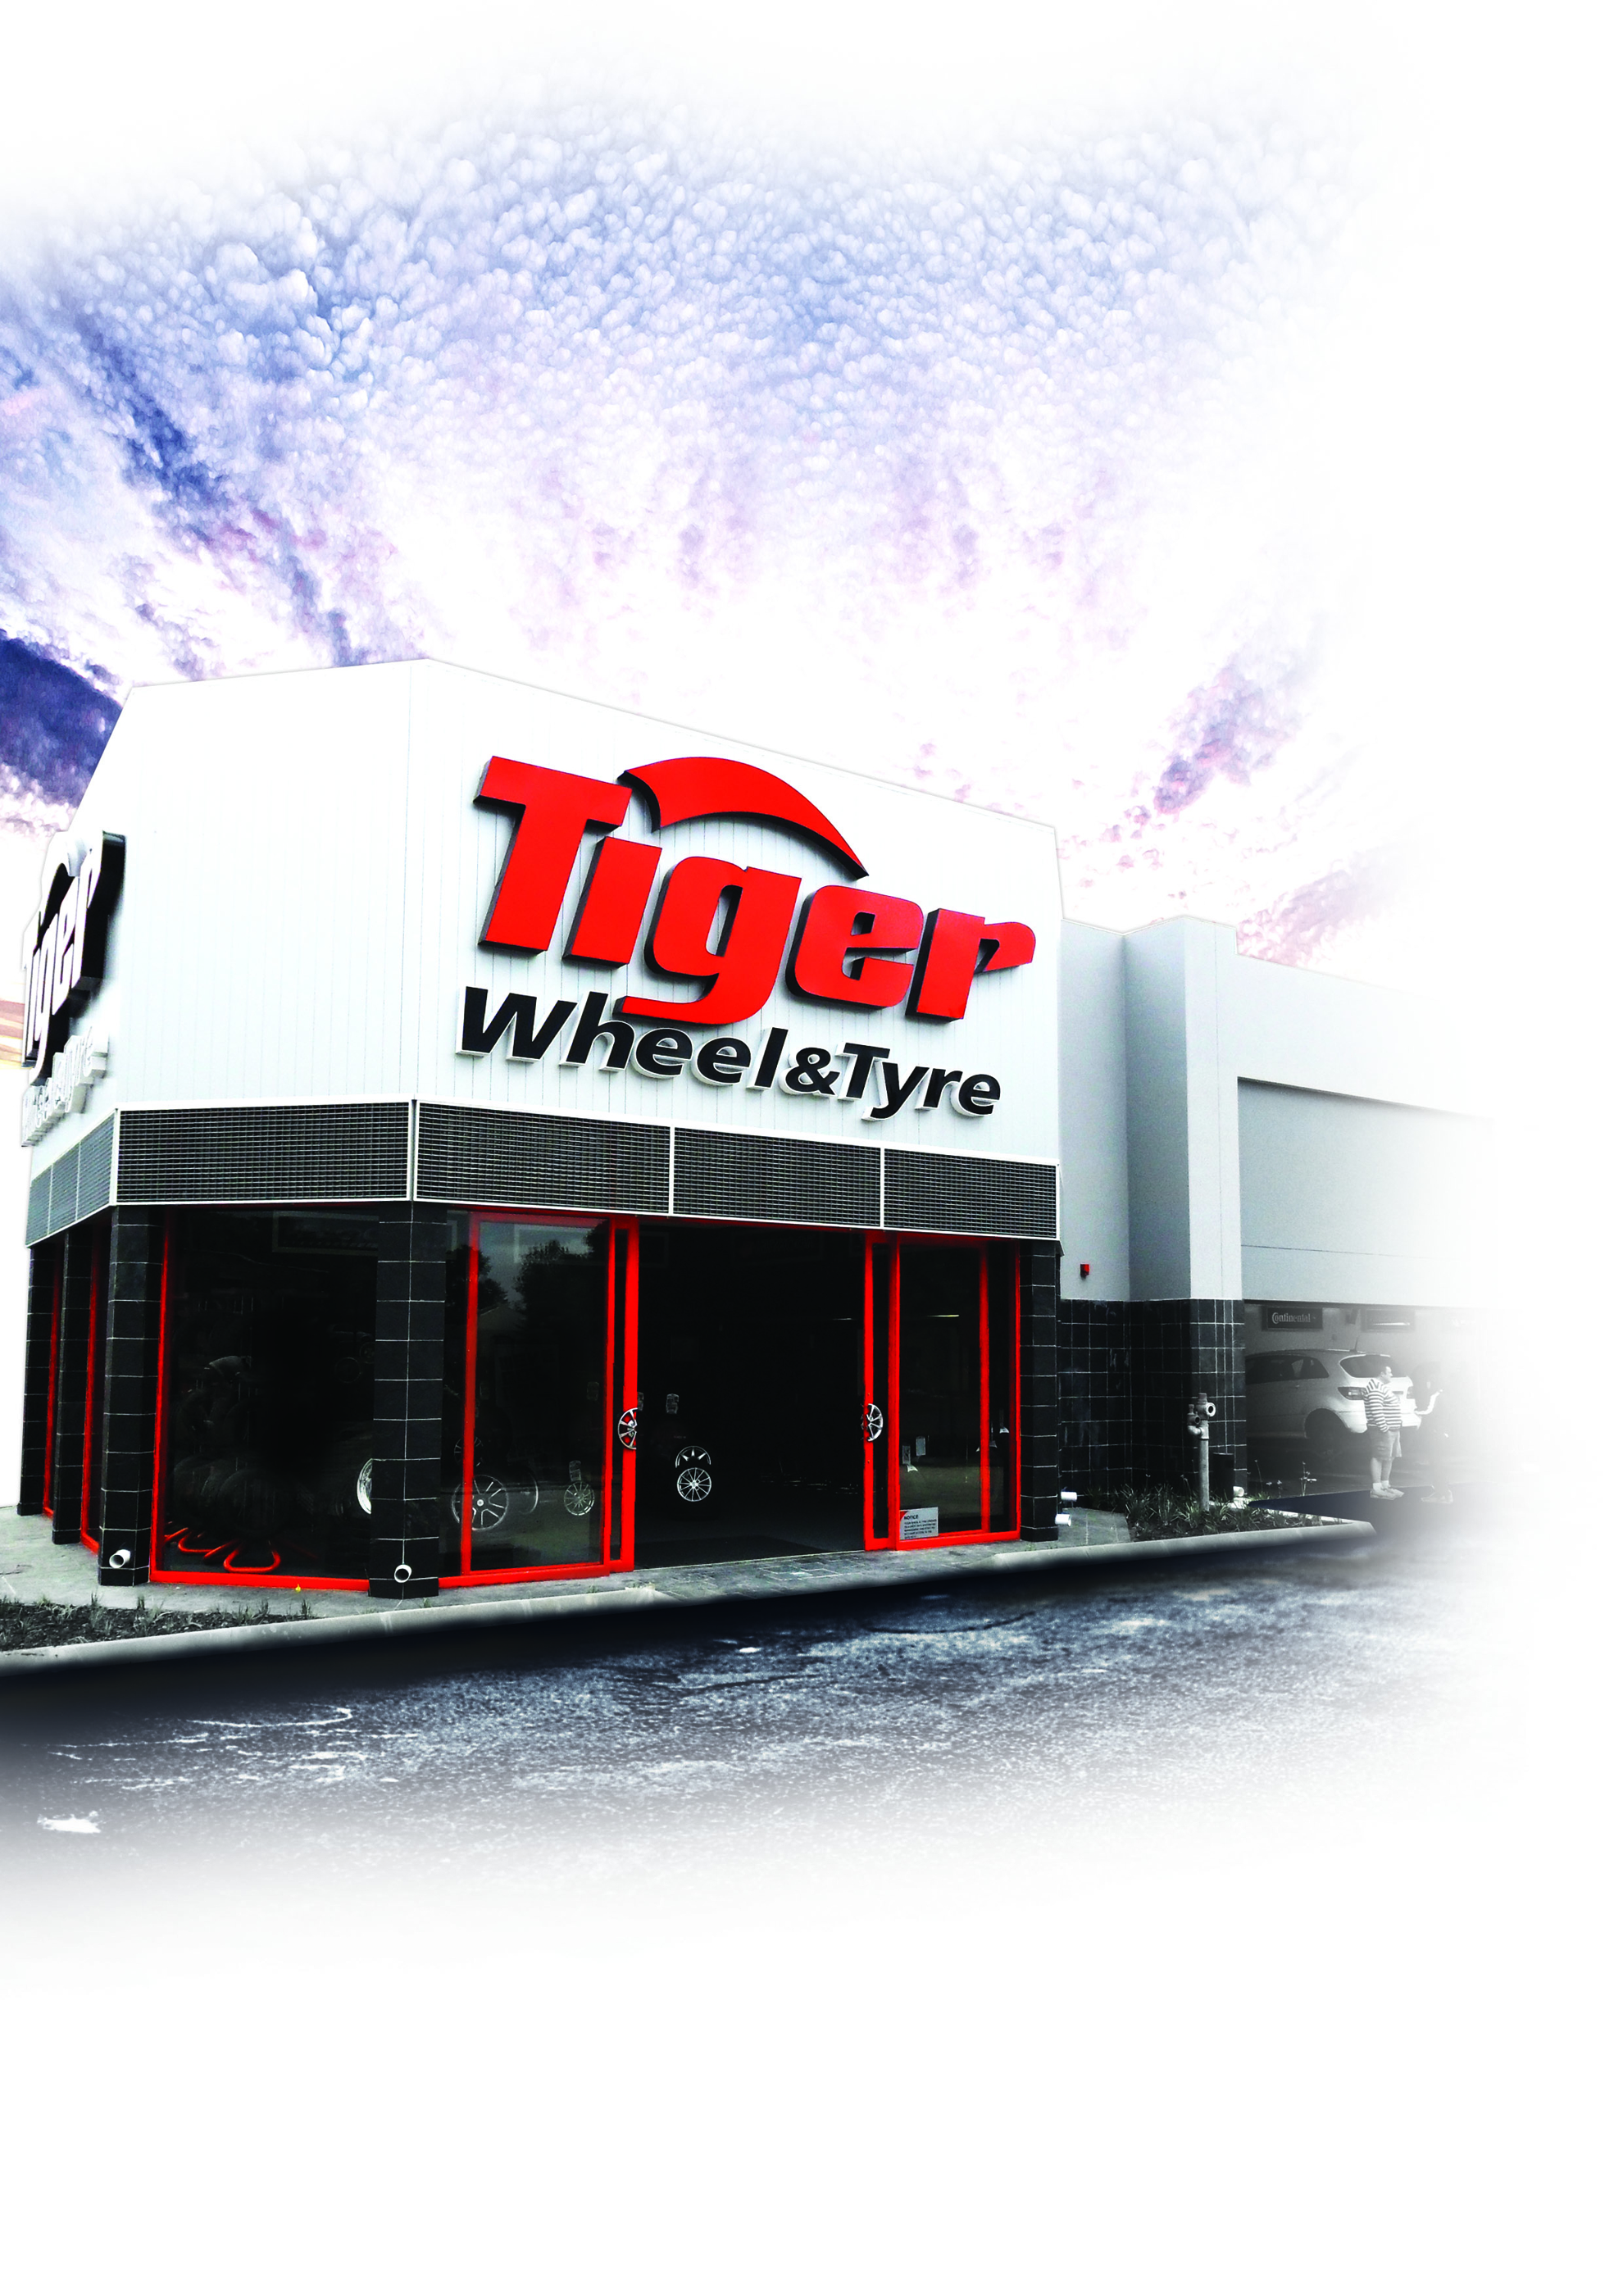 Tiger-Wheel-and-Tyre